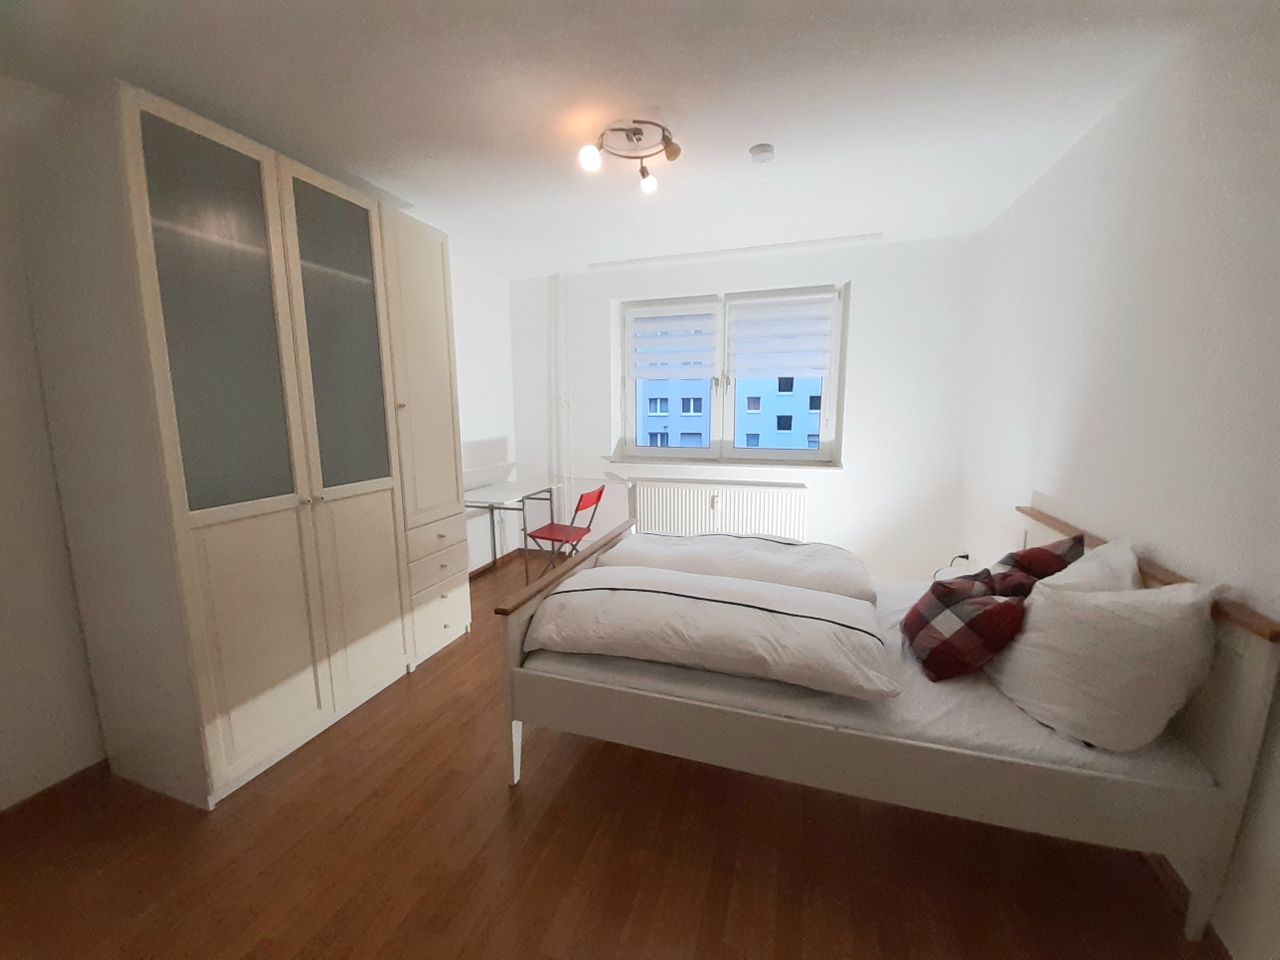 D - E - F - KR Frankfurt Niederrad Perfect shaped appartment including everything that you need, 3 rooms and balcony